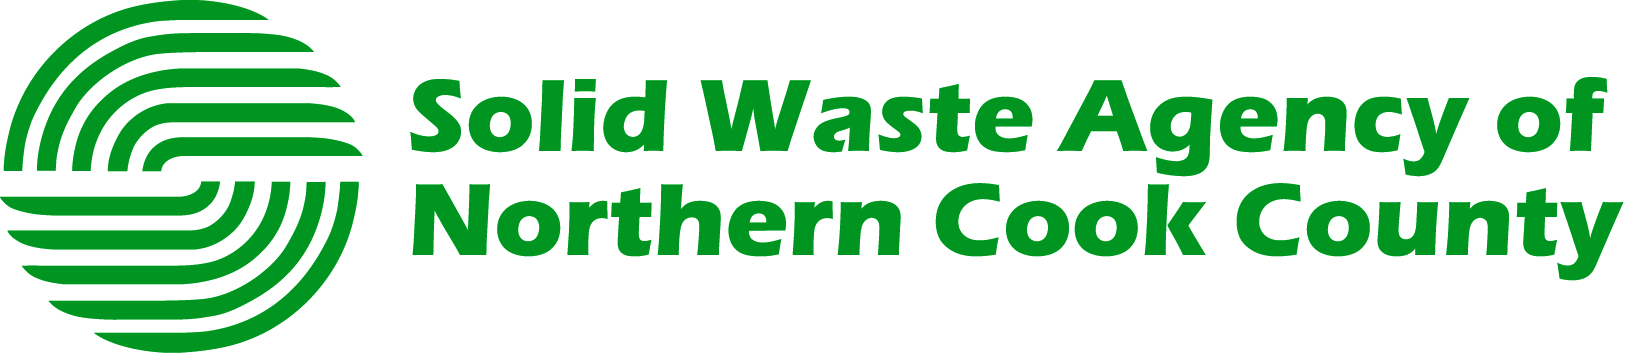 Solid Waste Agency of Northern Cook County is a Silver Sustaining Parnter